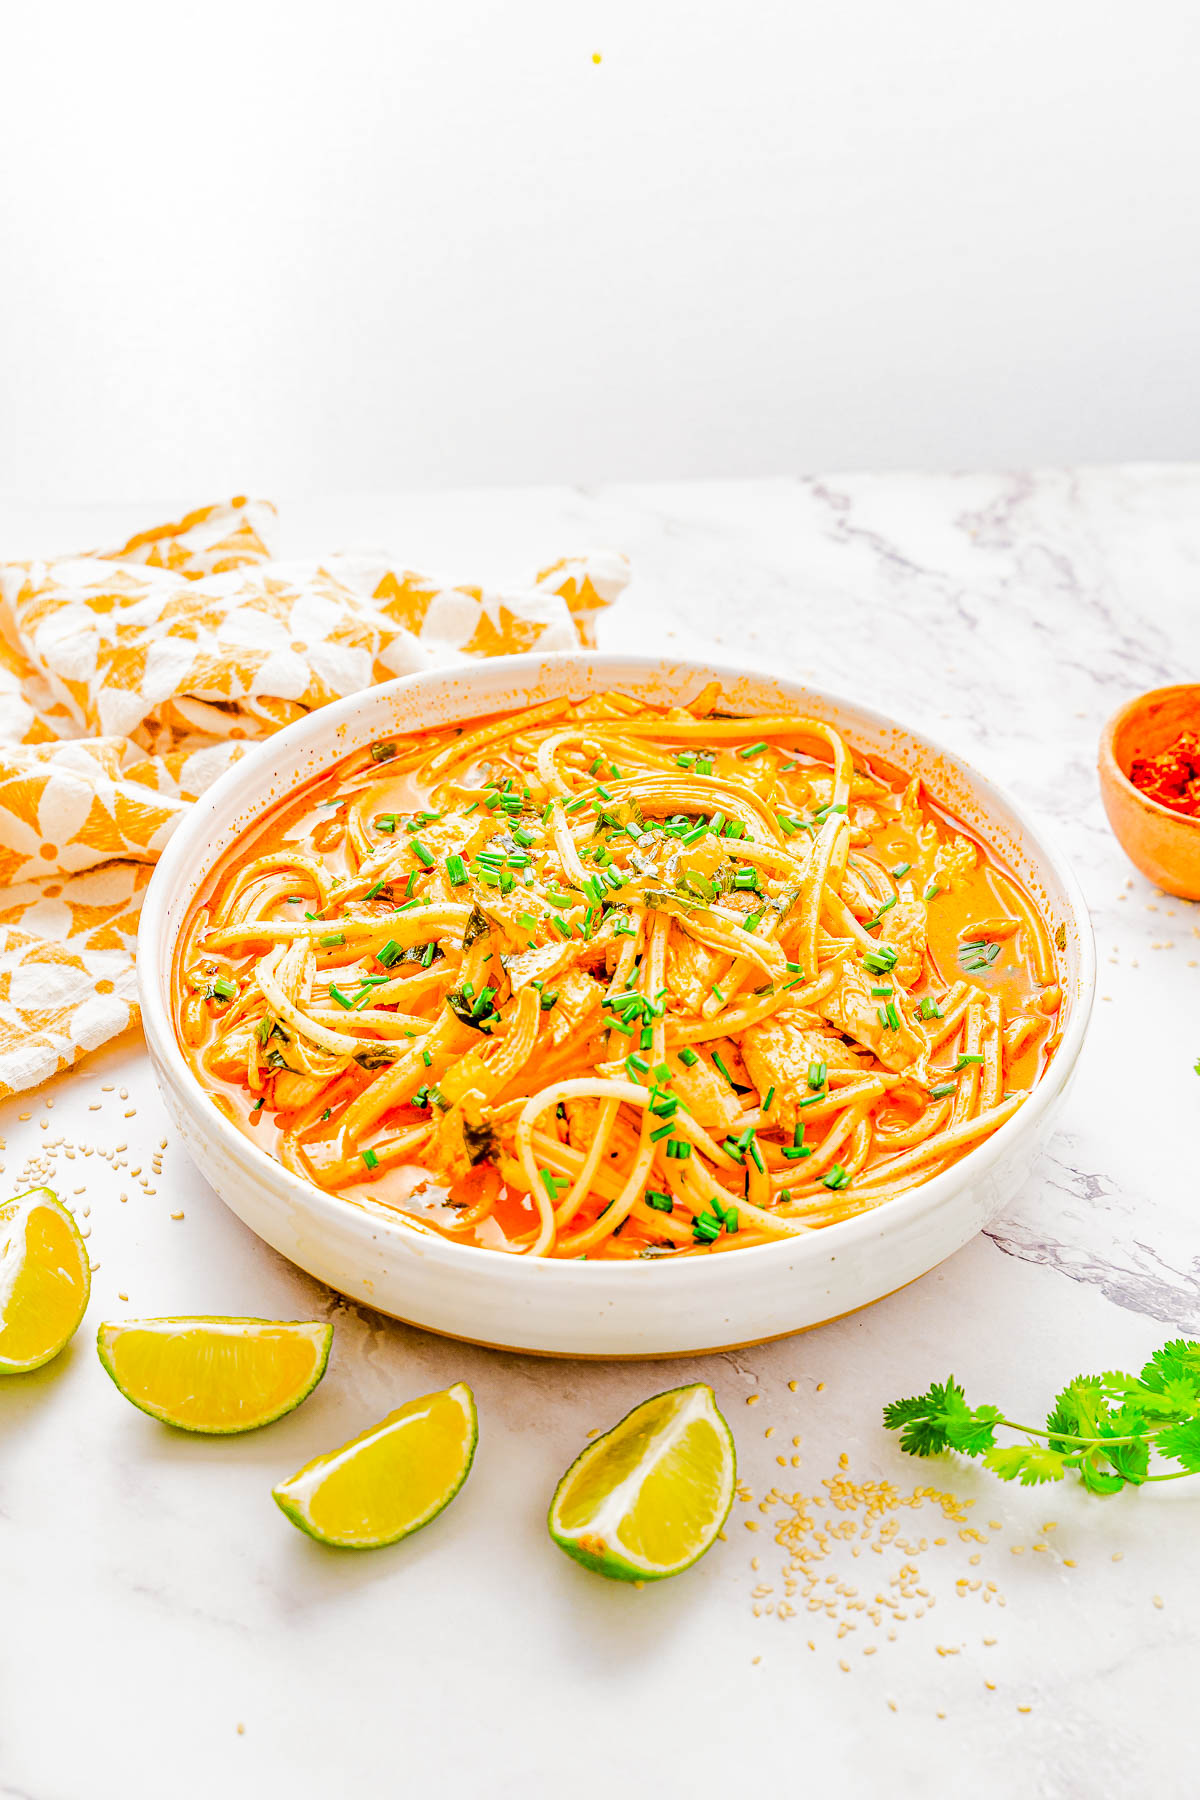 Thai Noodle Soup with Chicken - Recreate this Thai restaurant-inspired soup at home in 20 minutes! An EASY, one-pot recipe for this comforting soup made with shredded chicken, Thai red curry paste, coconut milk, basil, cilantro, green onions, and more! Healthy comfort food never tasted so good!